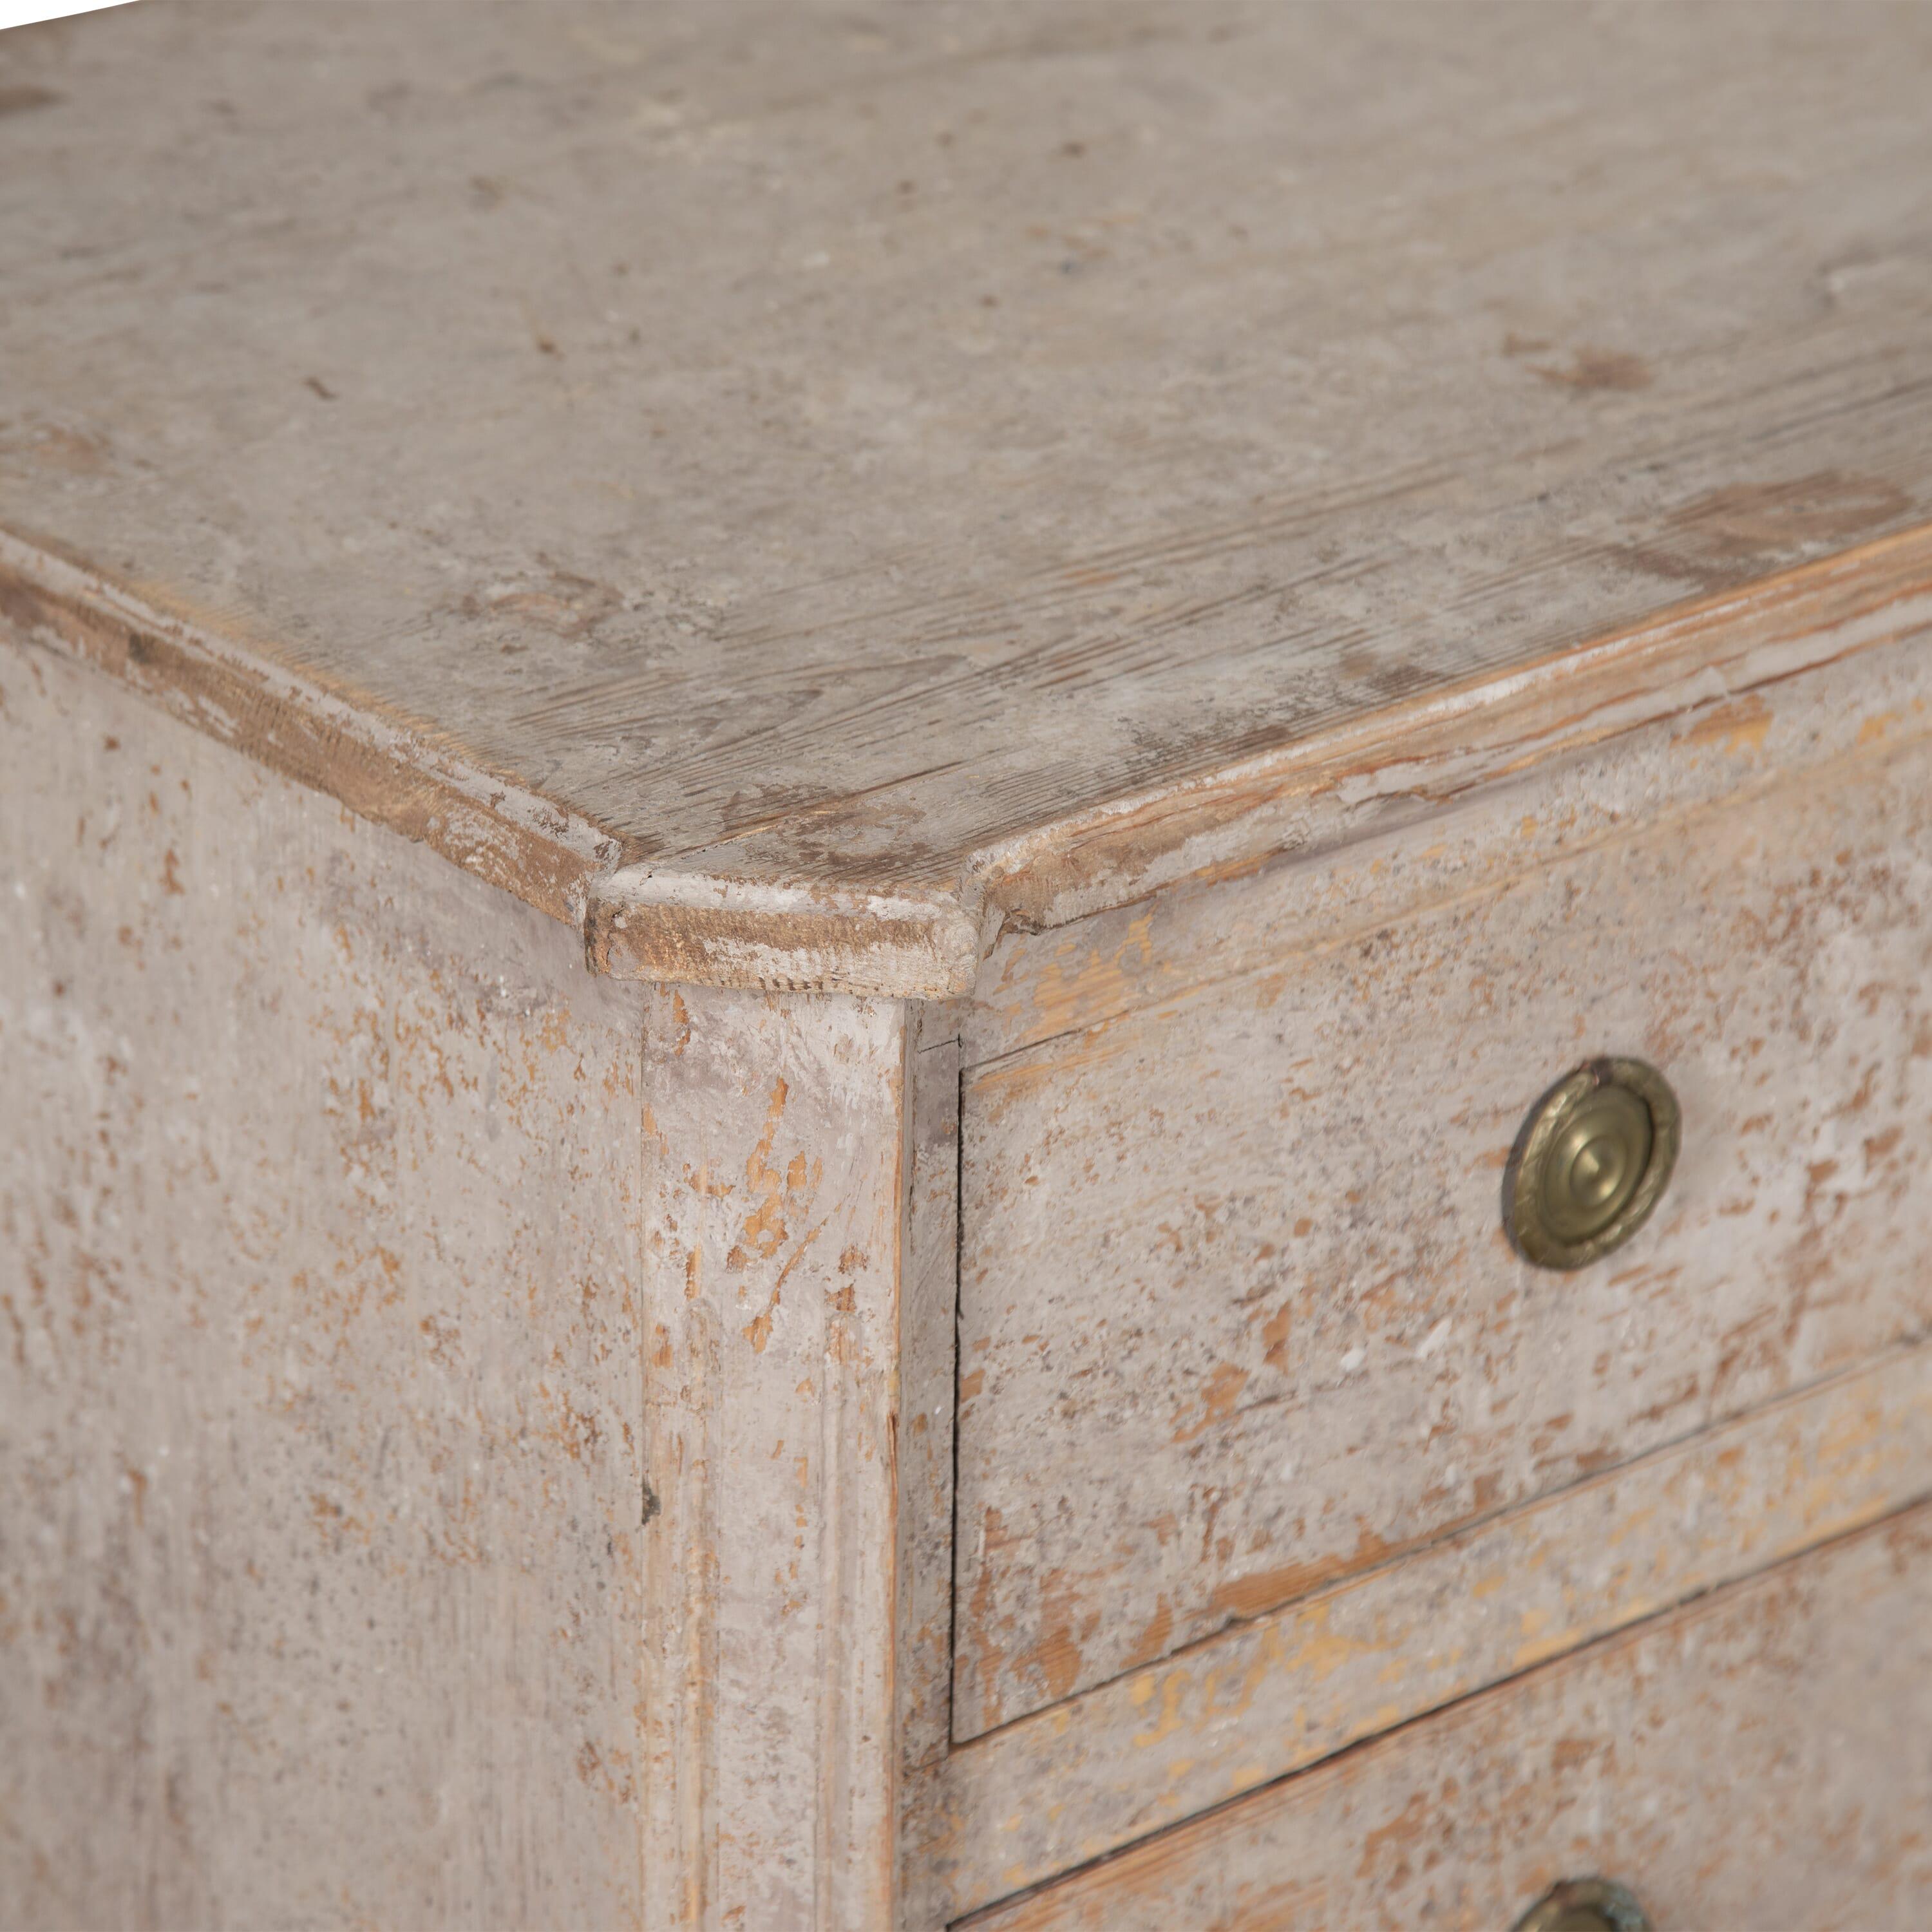 Early 19th Gustavian commode.
With three storage drawers and later handles. 
Repainted and would suit all interior settings.